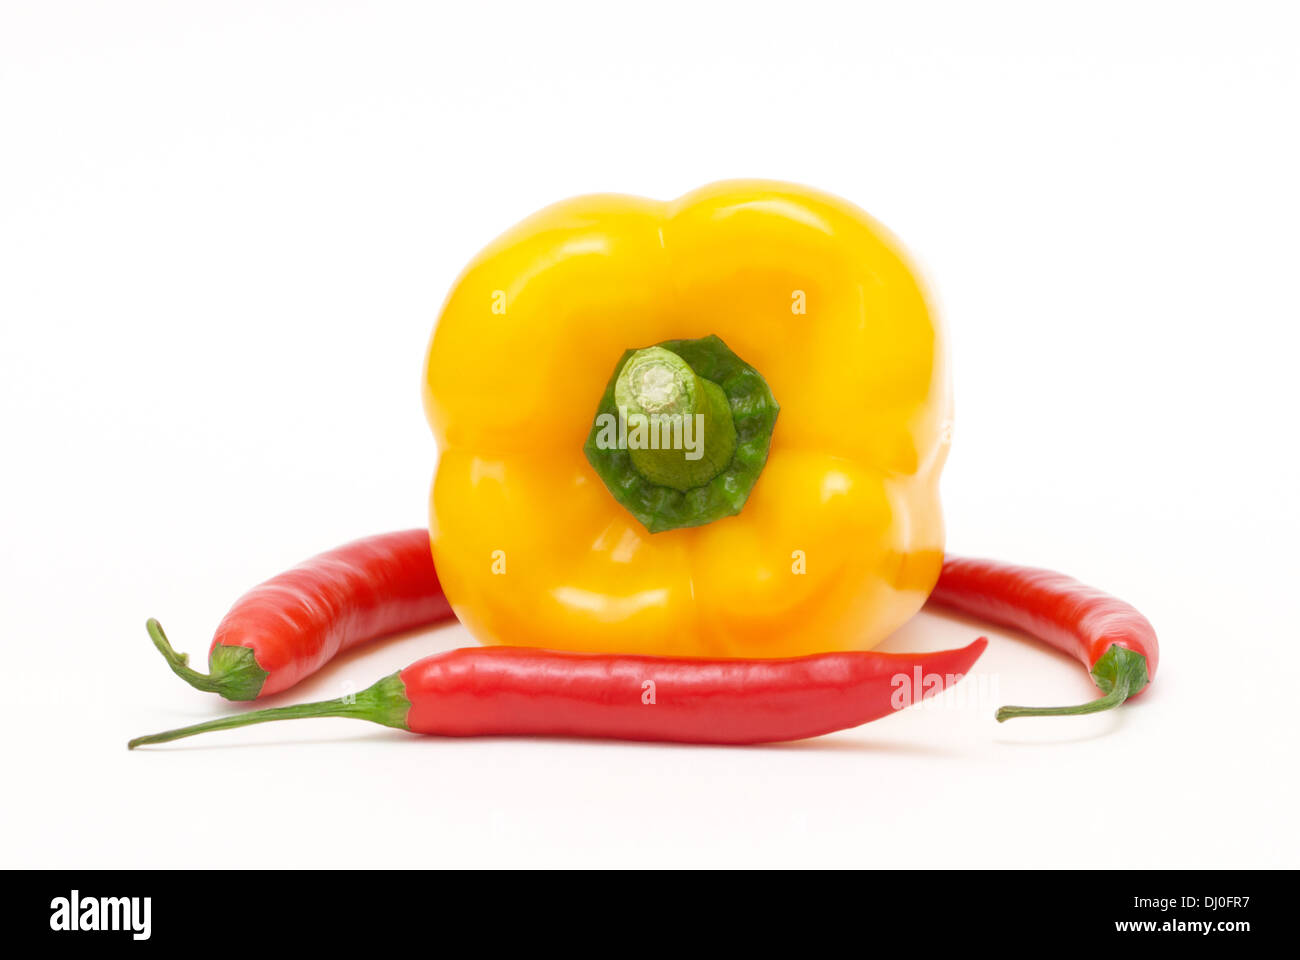 Yellow pepper with three red chili peppers on a white background Stock Photo